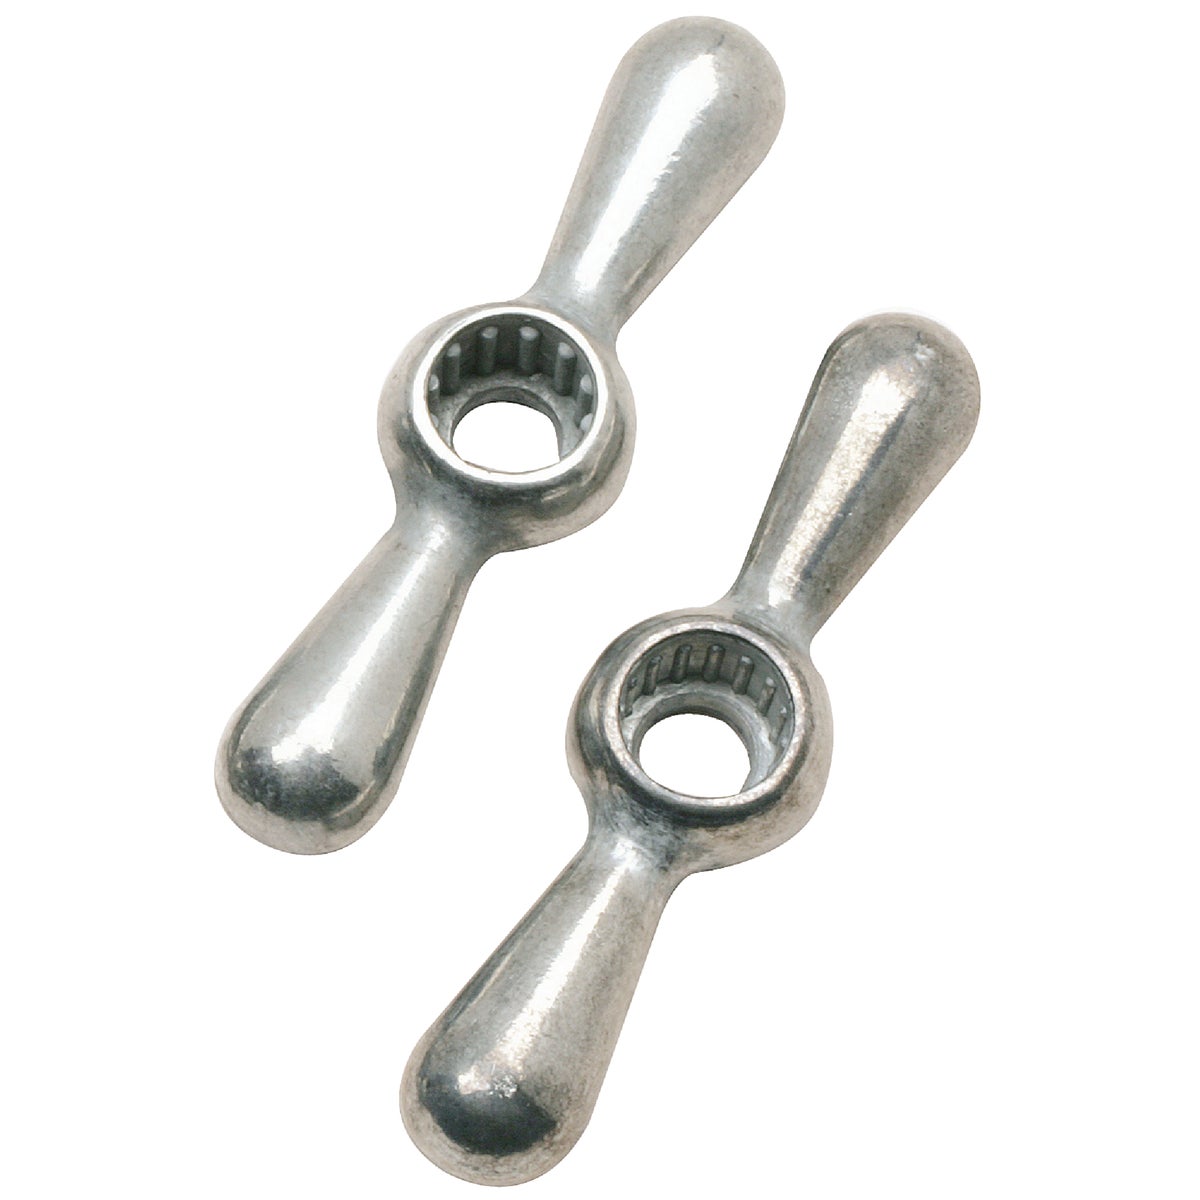 Item 489972, Tee handle for use with 16 broach, splined stem. 2 per card.